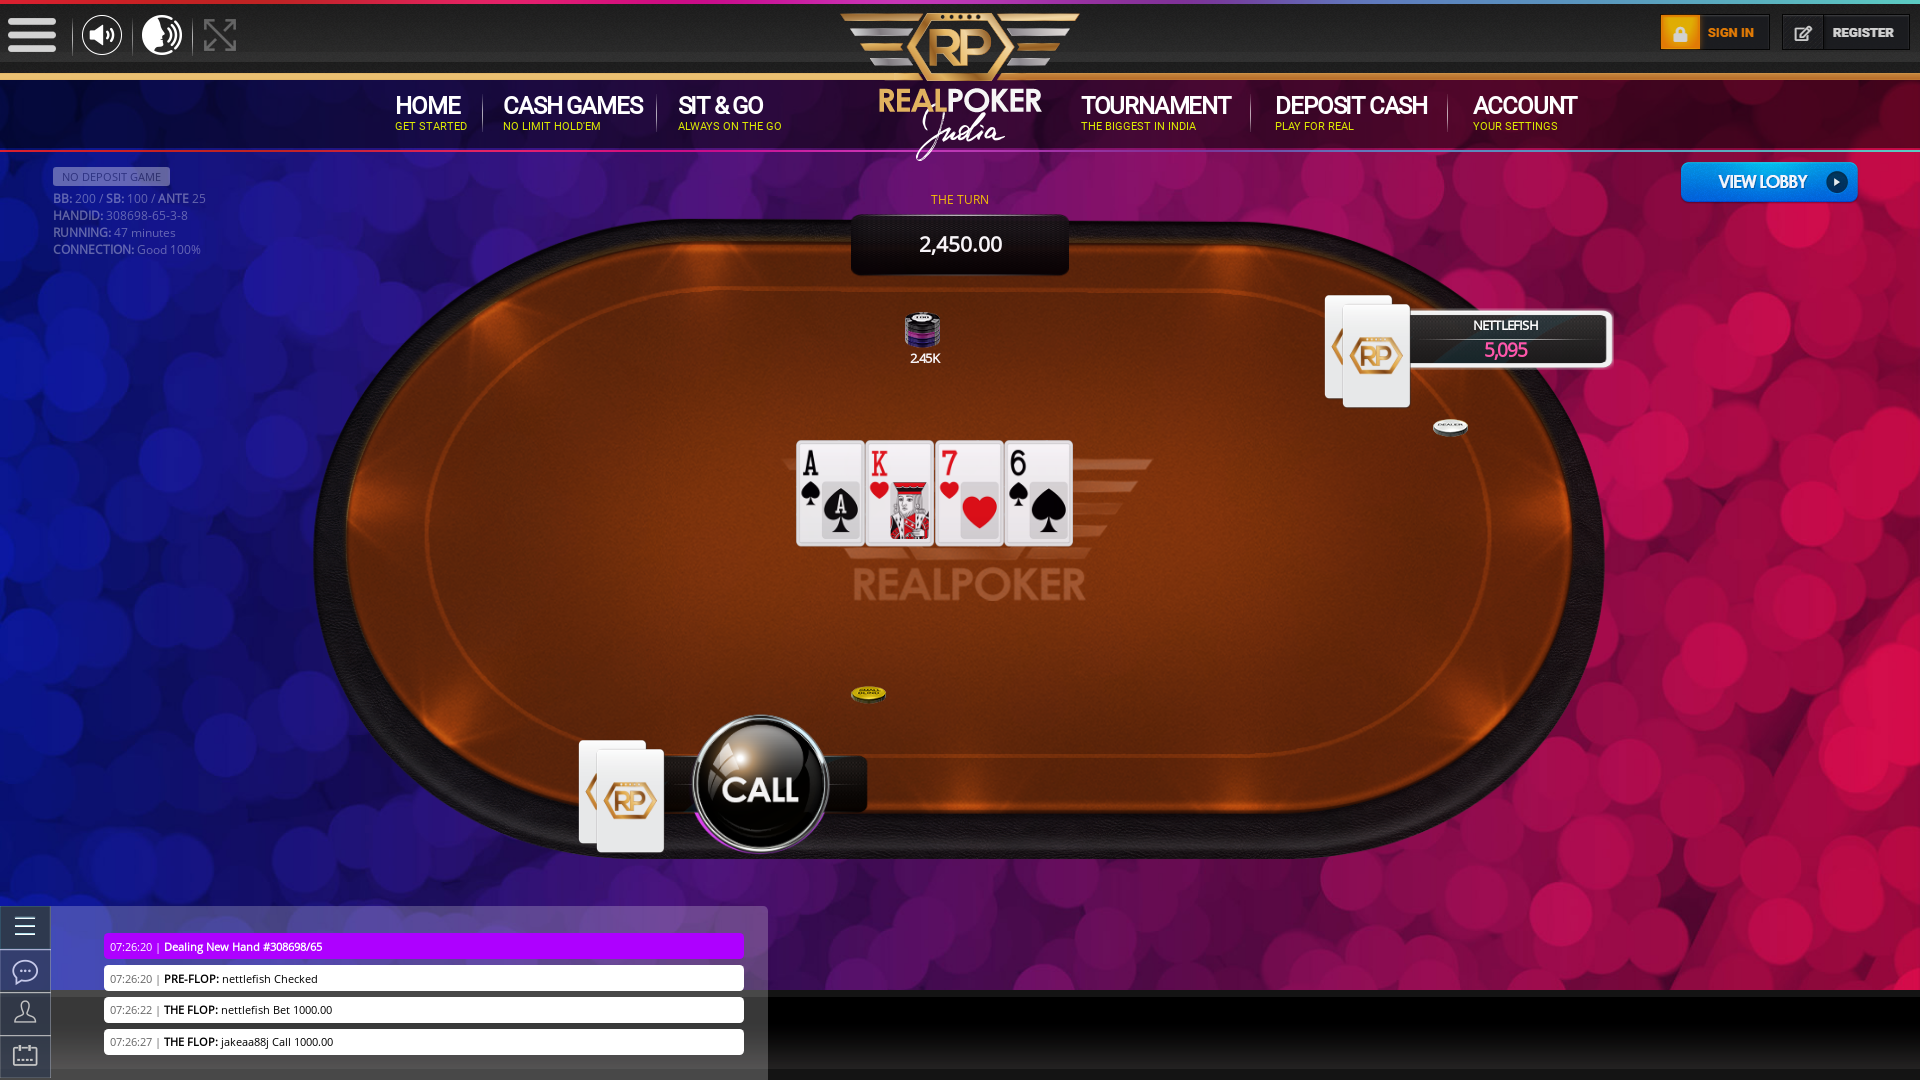 BTM Layout, Bangalore texas holdem poker table on a 10 player table in the 47th minute